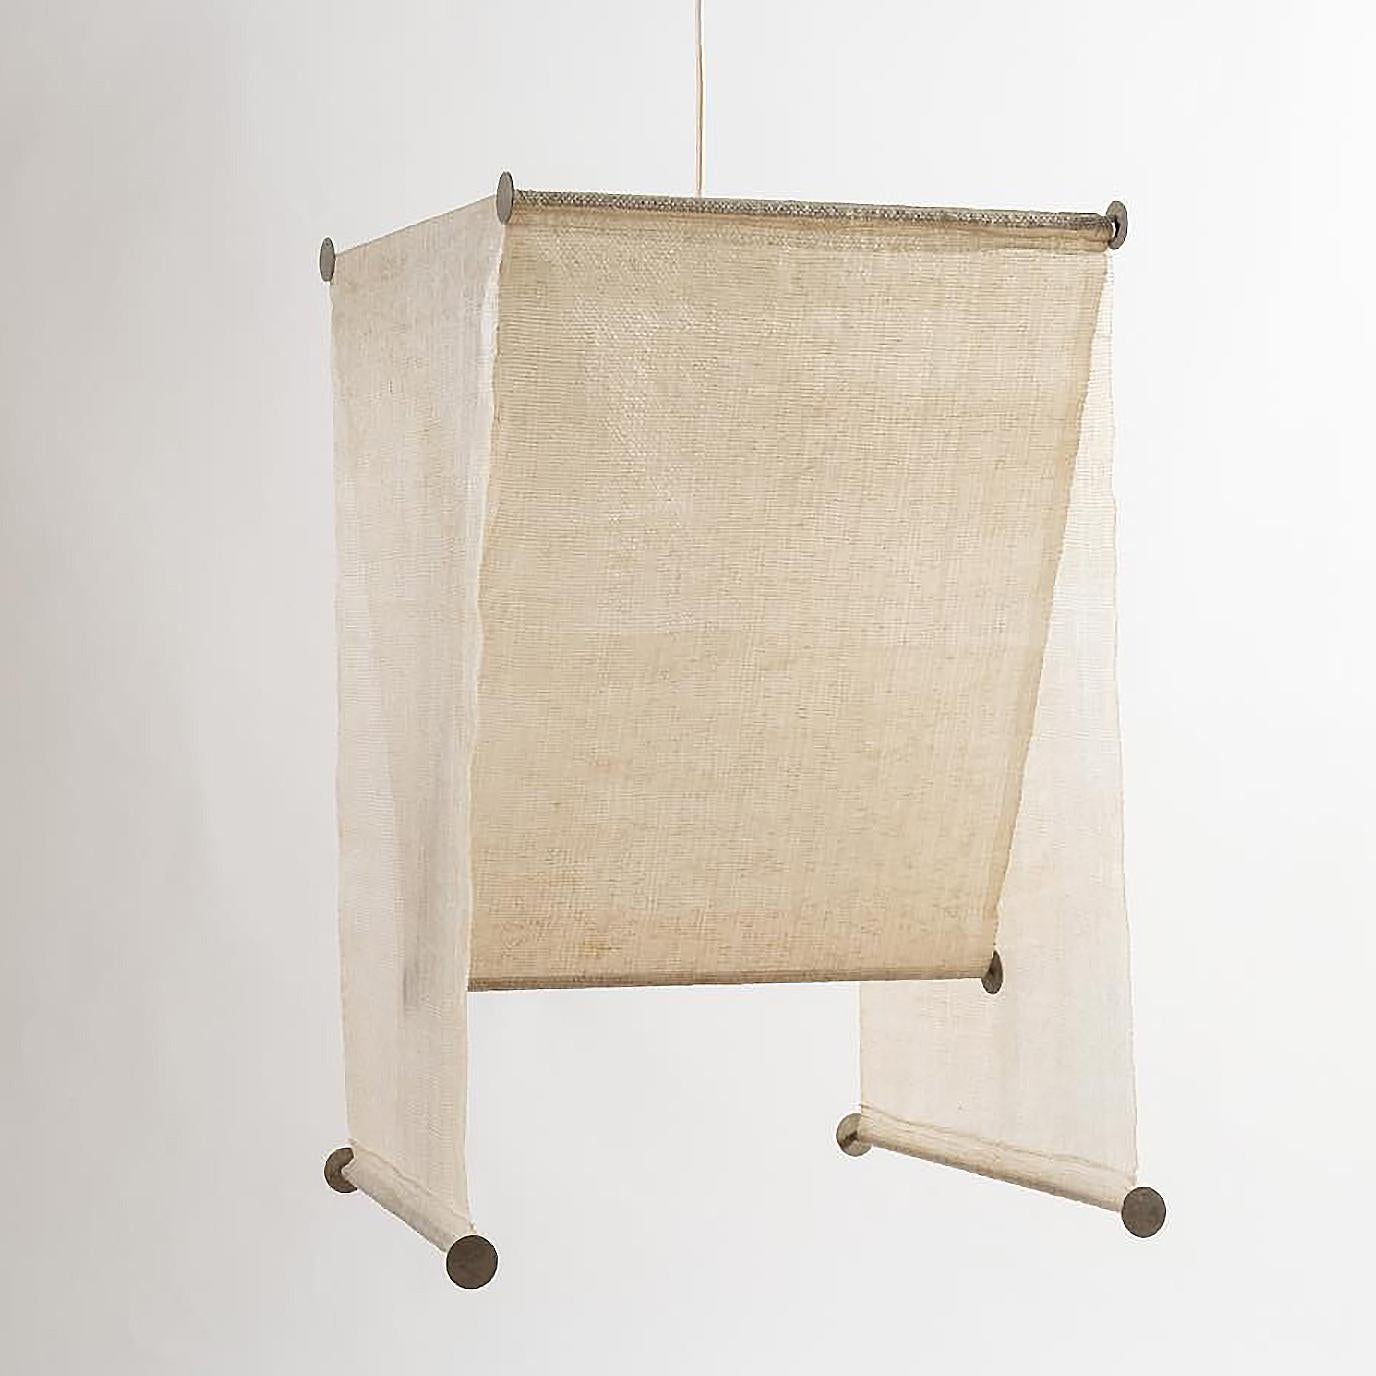 Achille Castiglioni (1918-2002) & Pier Giacomo Castiglioni (1913-1968)

Kd51/R - Teli

A metal and polyethylene fabric rectangular pendant light.
With a Flos label underneath.
Produced by Flos, Italy.
1970s.

Literature
Ottagono n°30, September